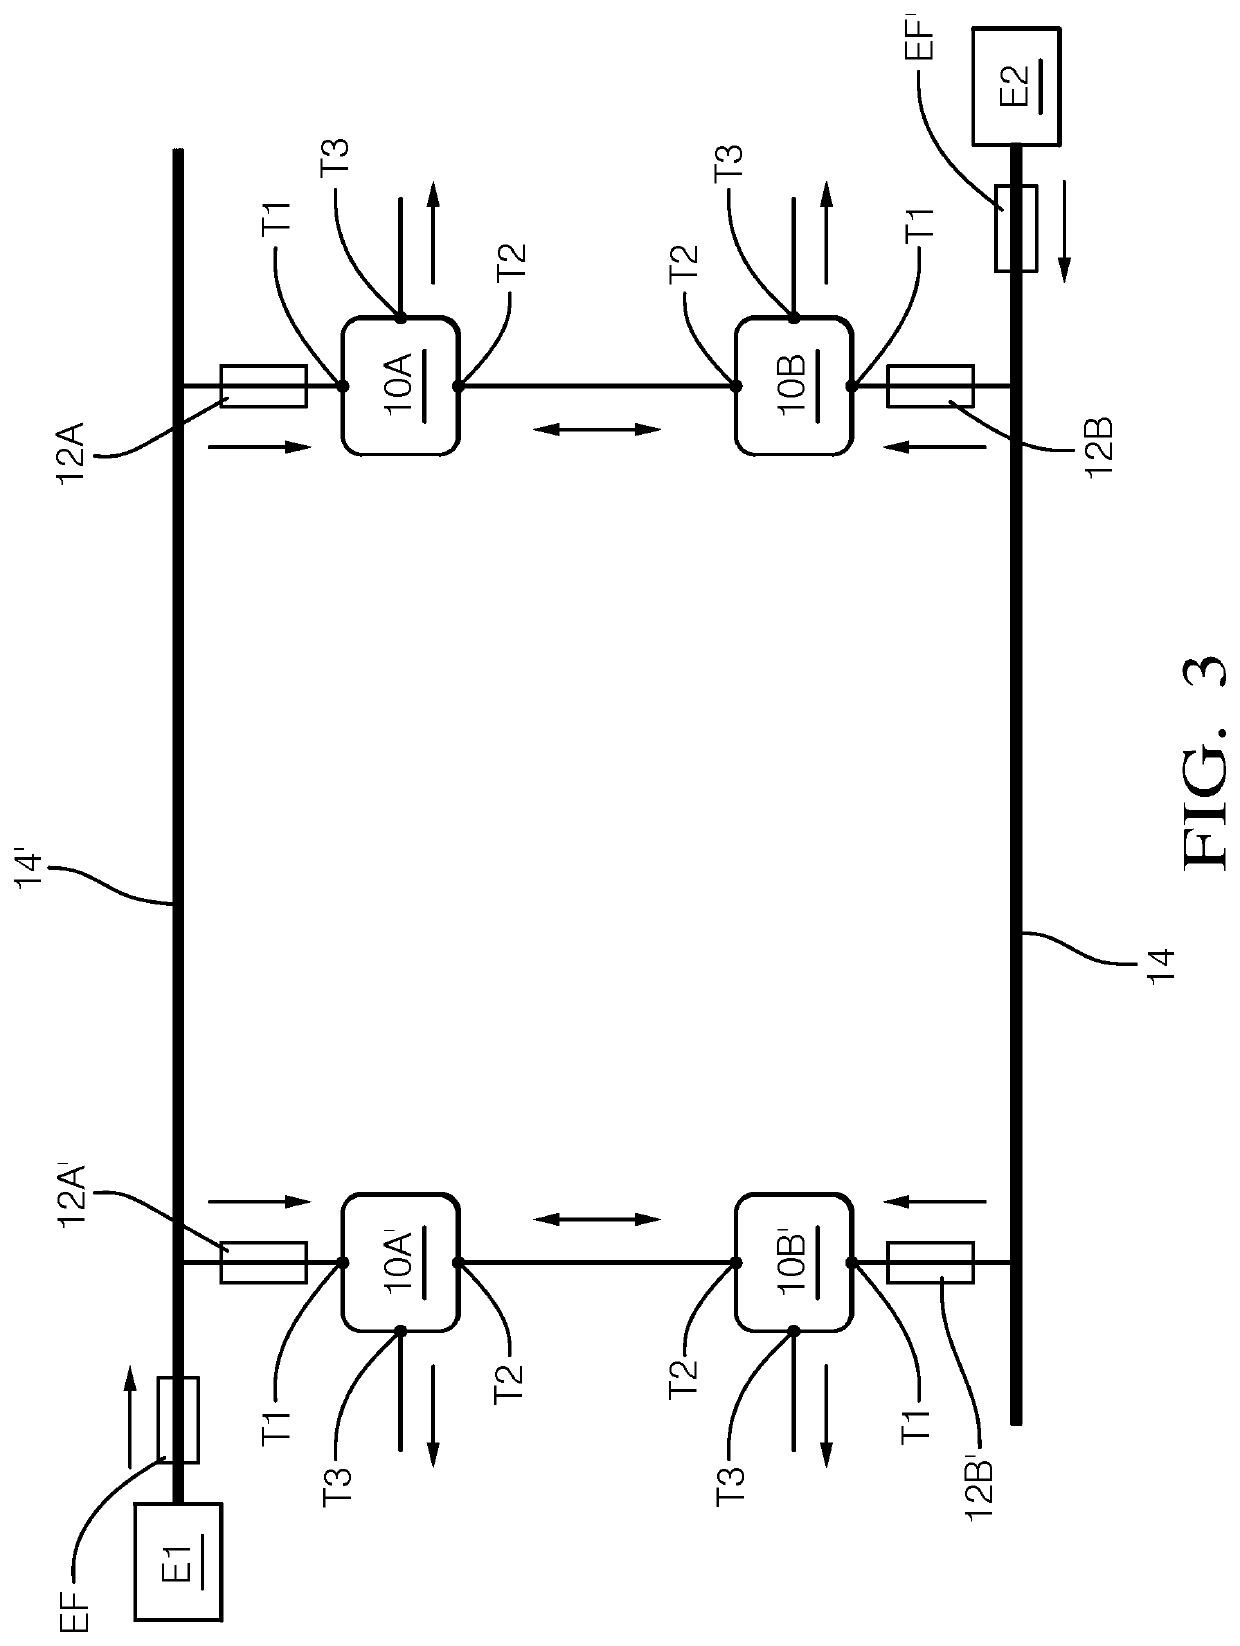 Electronic circuit for redundant supply of an electric load